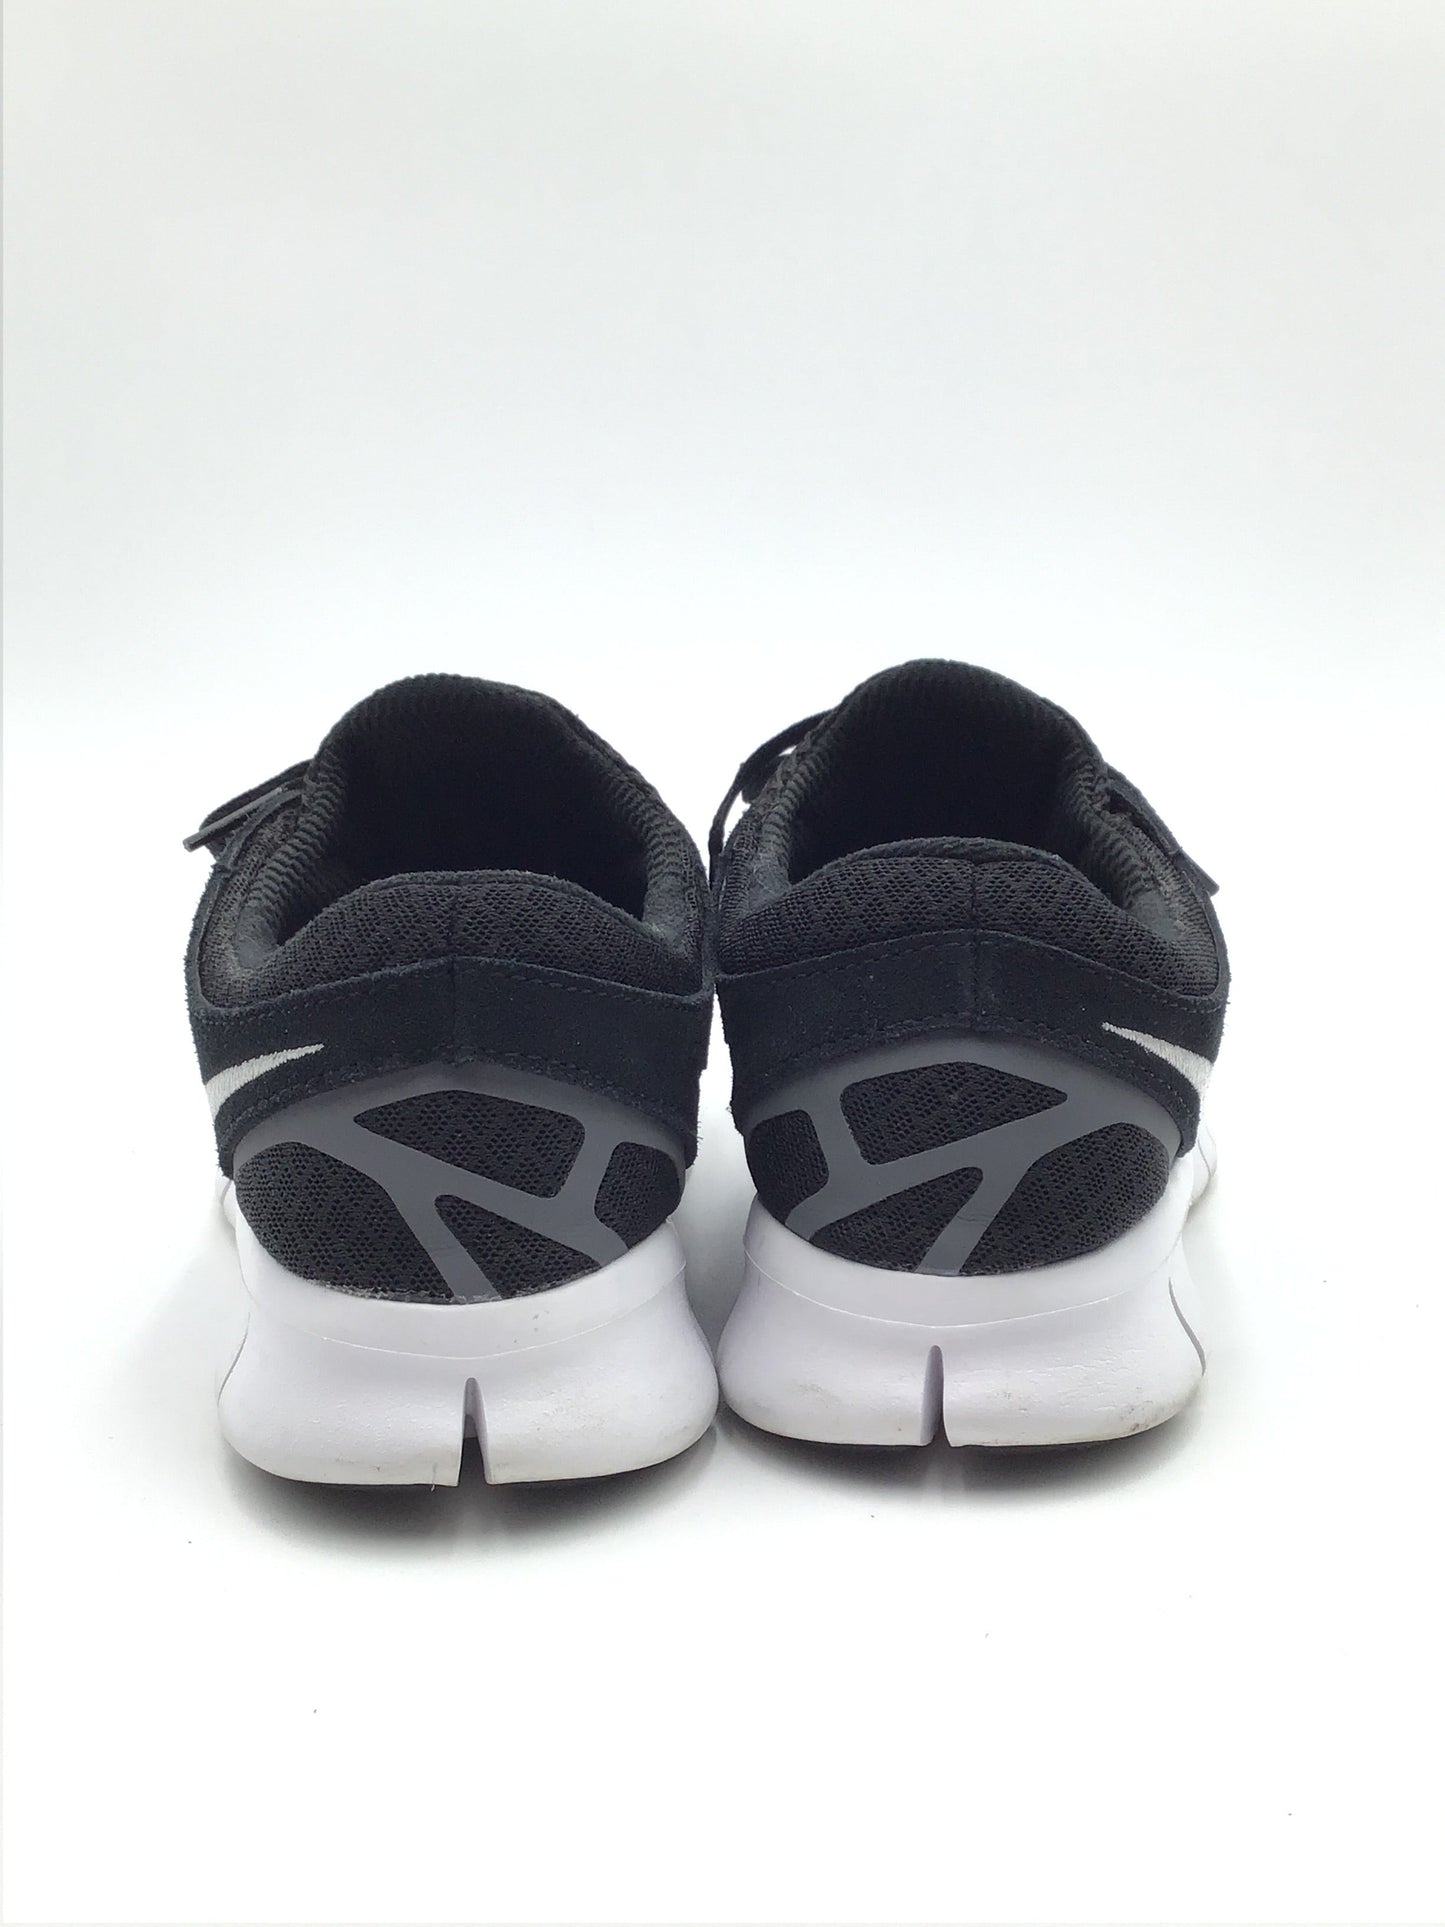 Black & White Shoes Sneakers Nike, Size 8